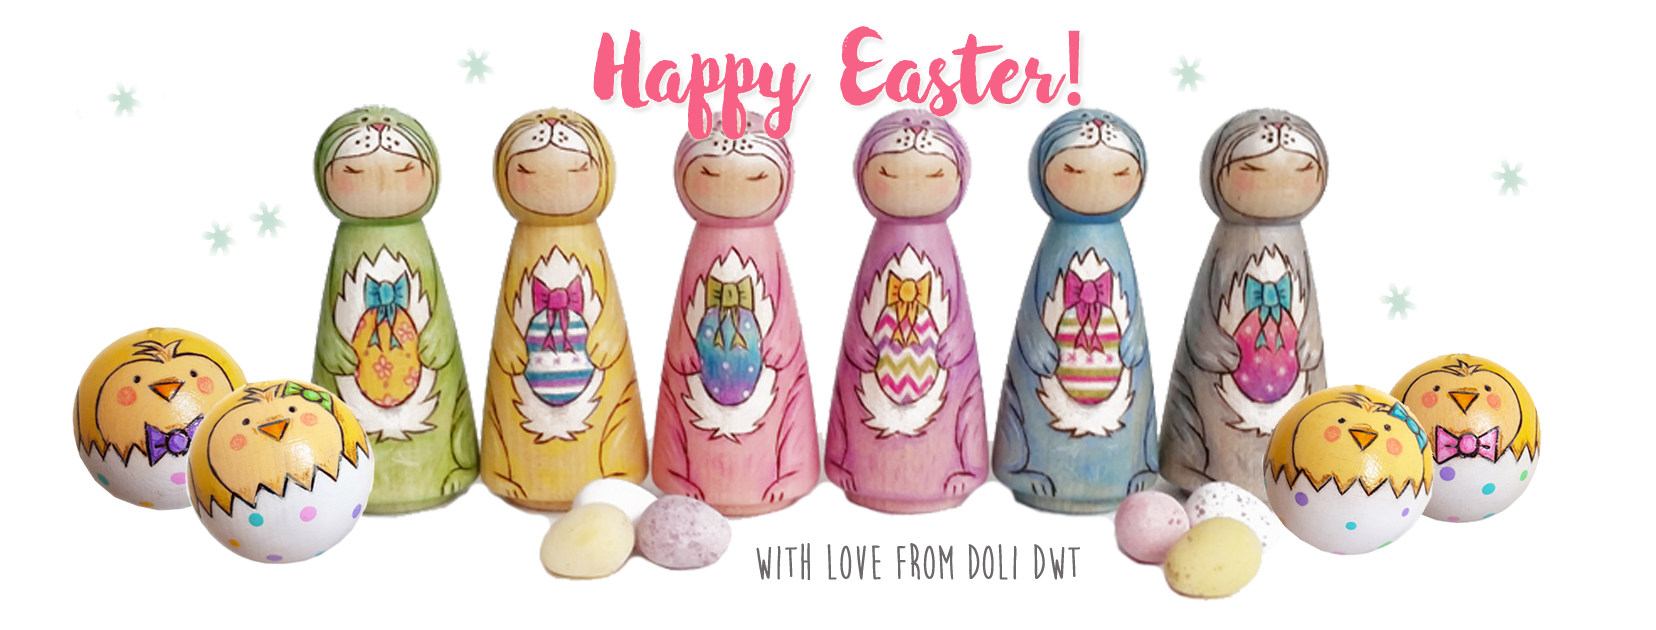 Happy Easter, easter decorations, easter bunny decorations, easter chick decorations